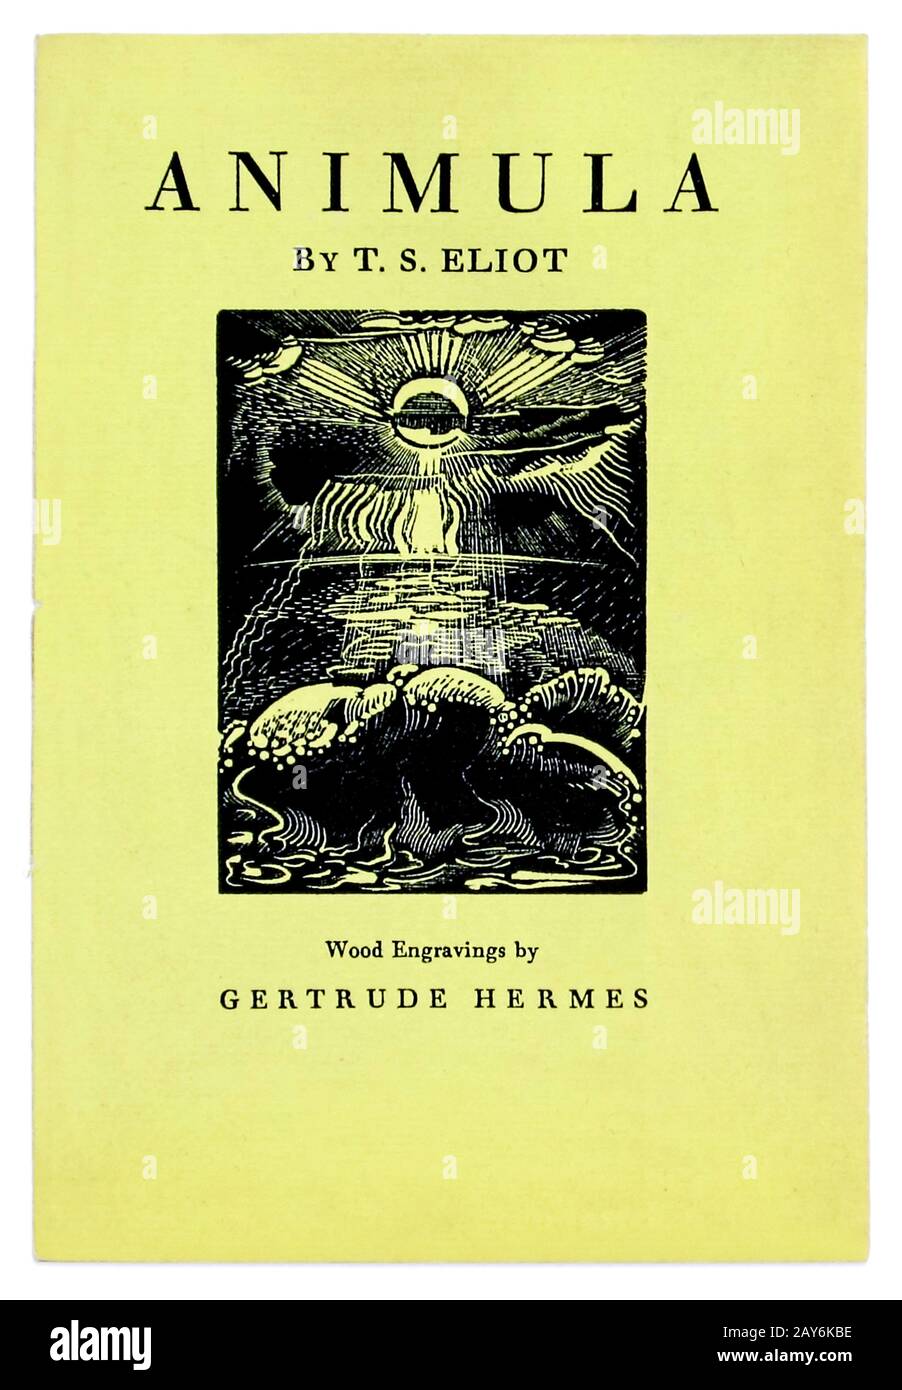 Animula by T. S. Eliot (1888-1965) featuring woodcuts by Getrude Hermes (1901-1983). Photograph of rare original 1929 pamphlet published by Faber & Faber, London Stock Photo